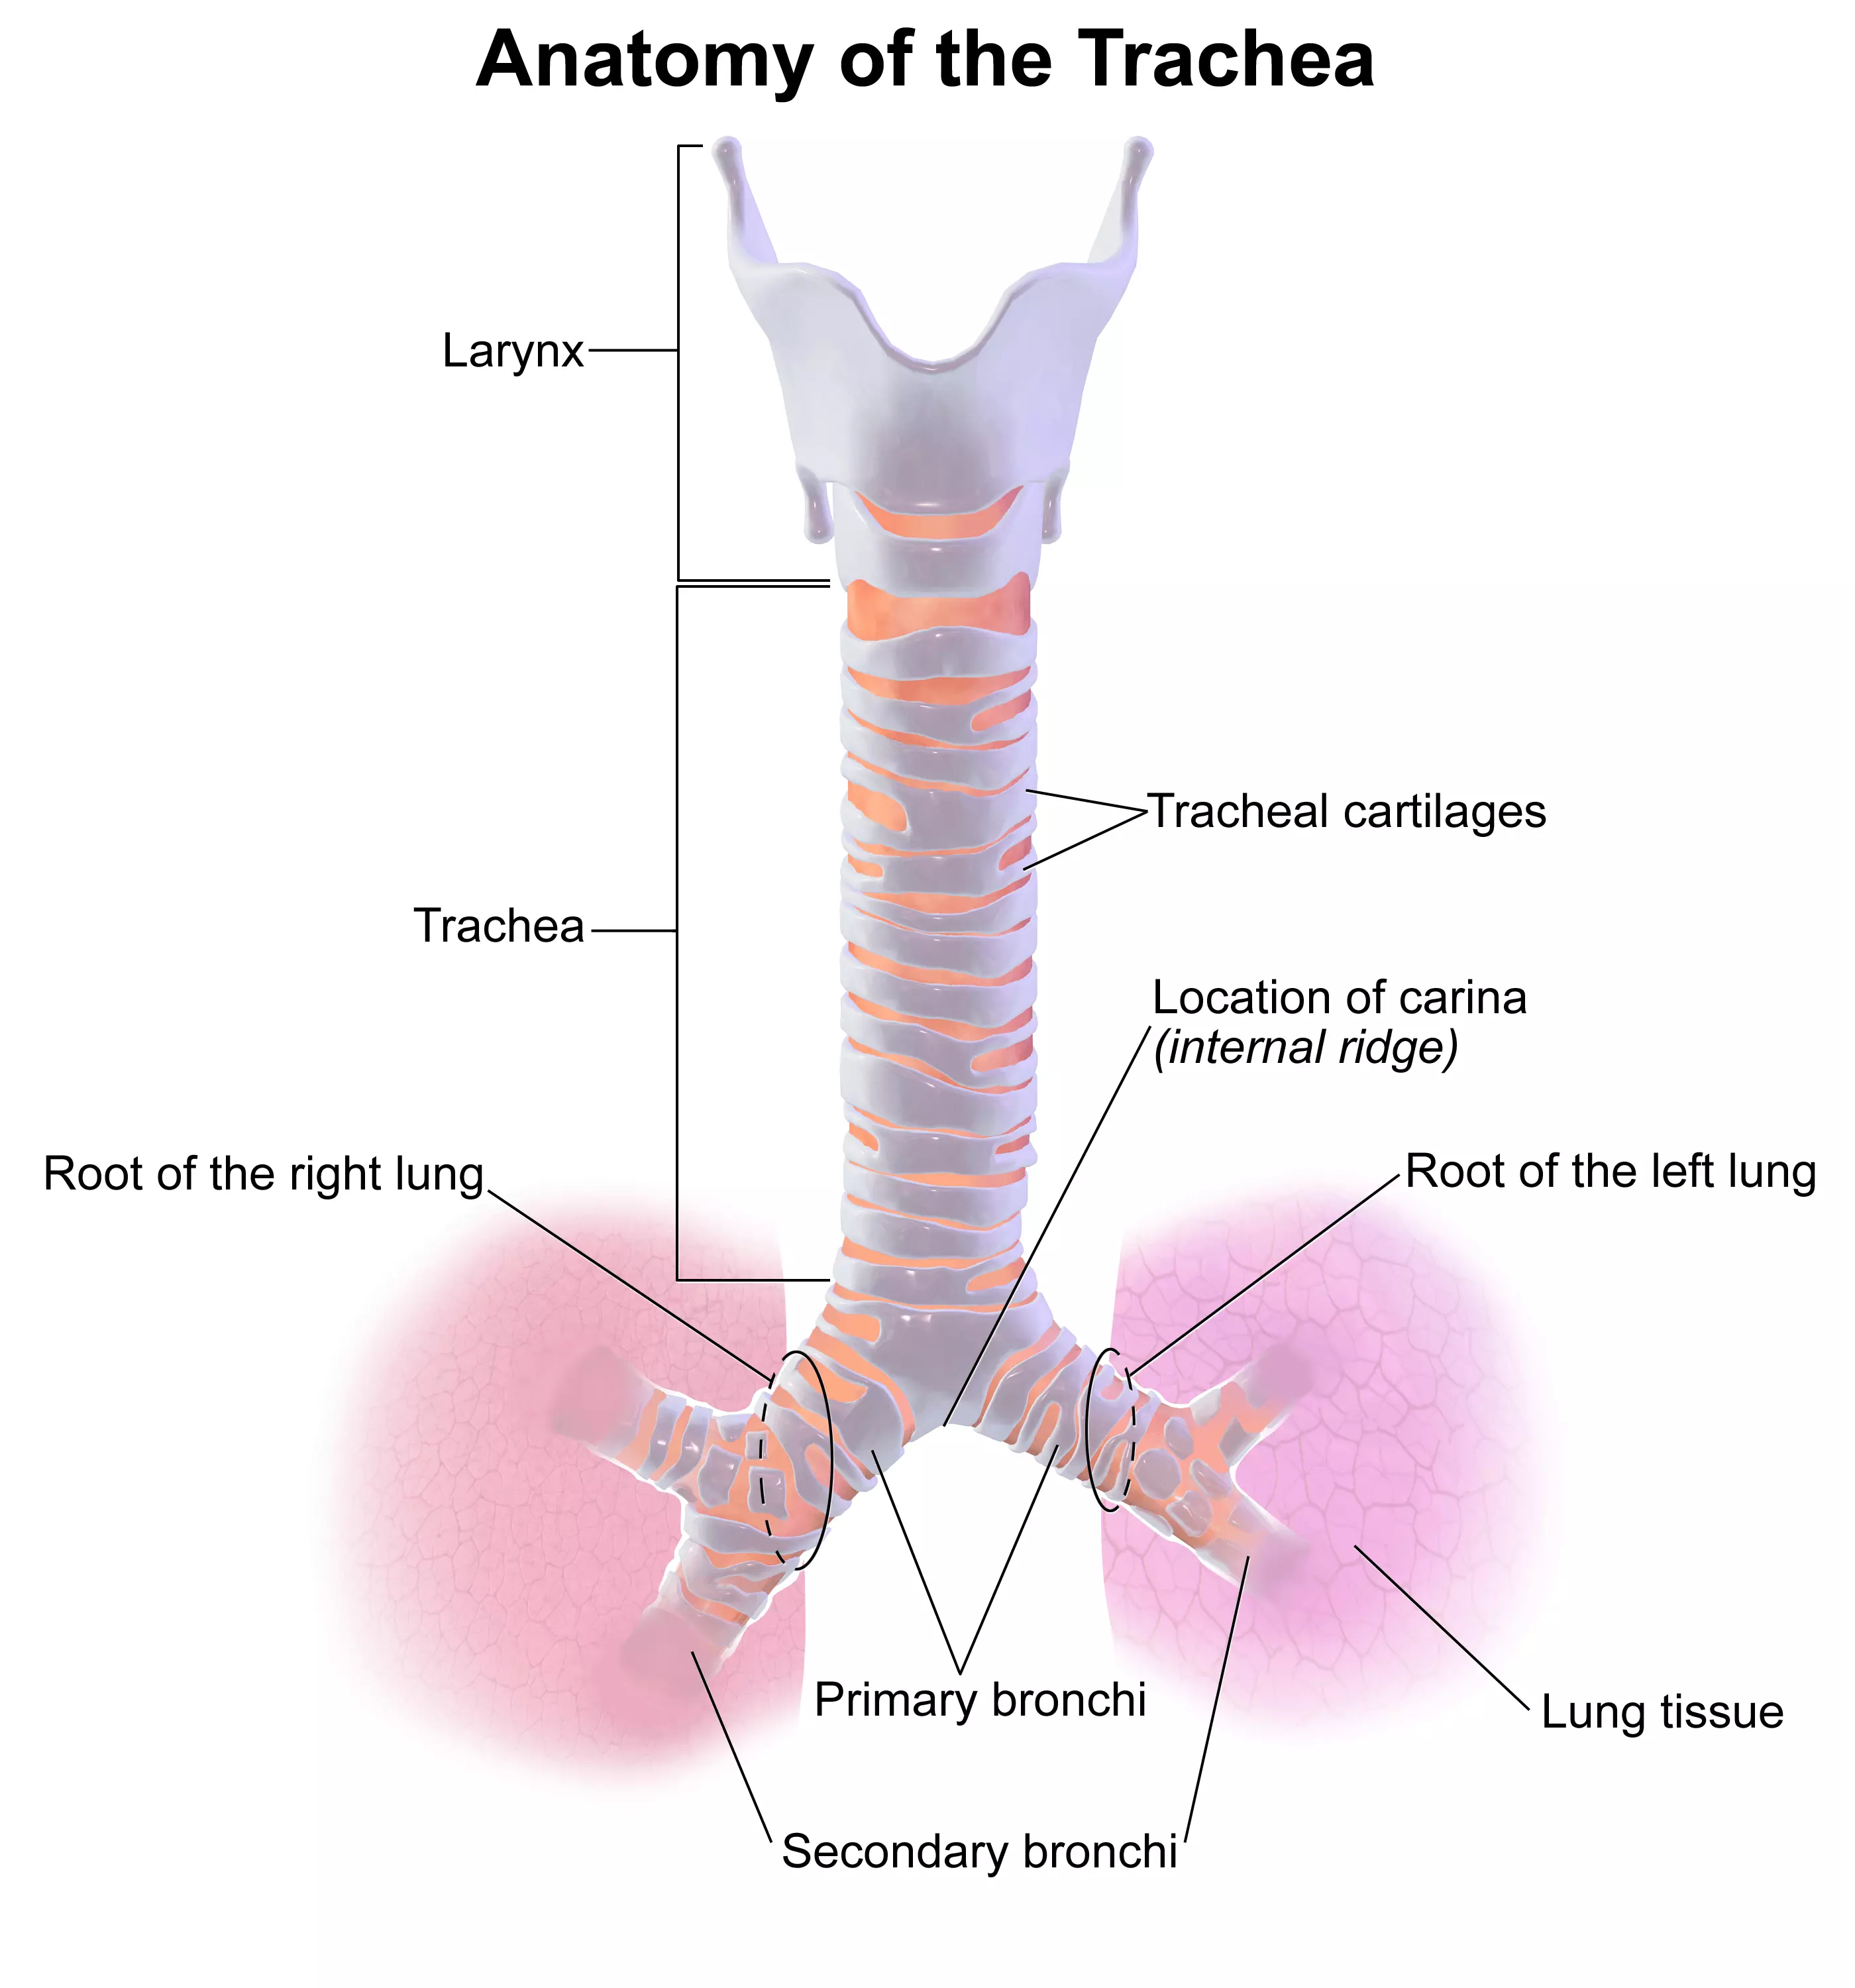 The Anatomy of the Trachea SimpleMed